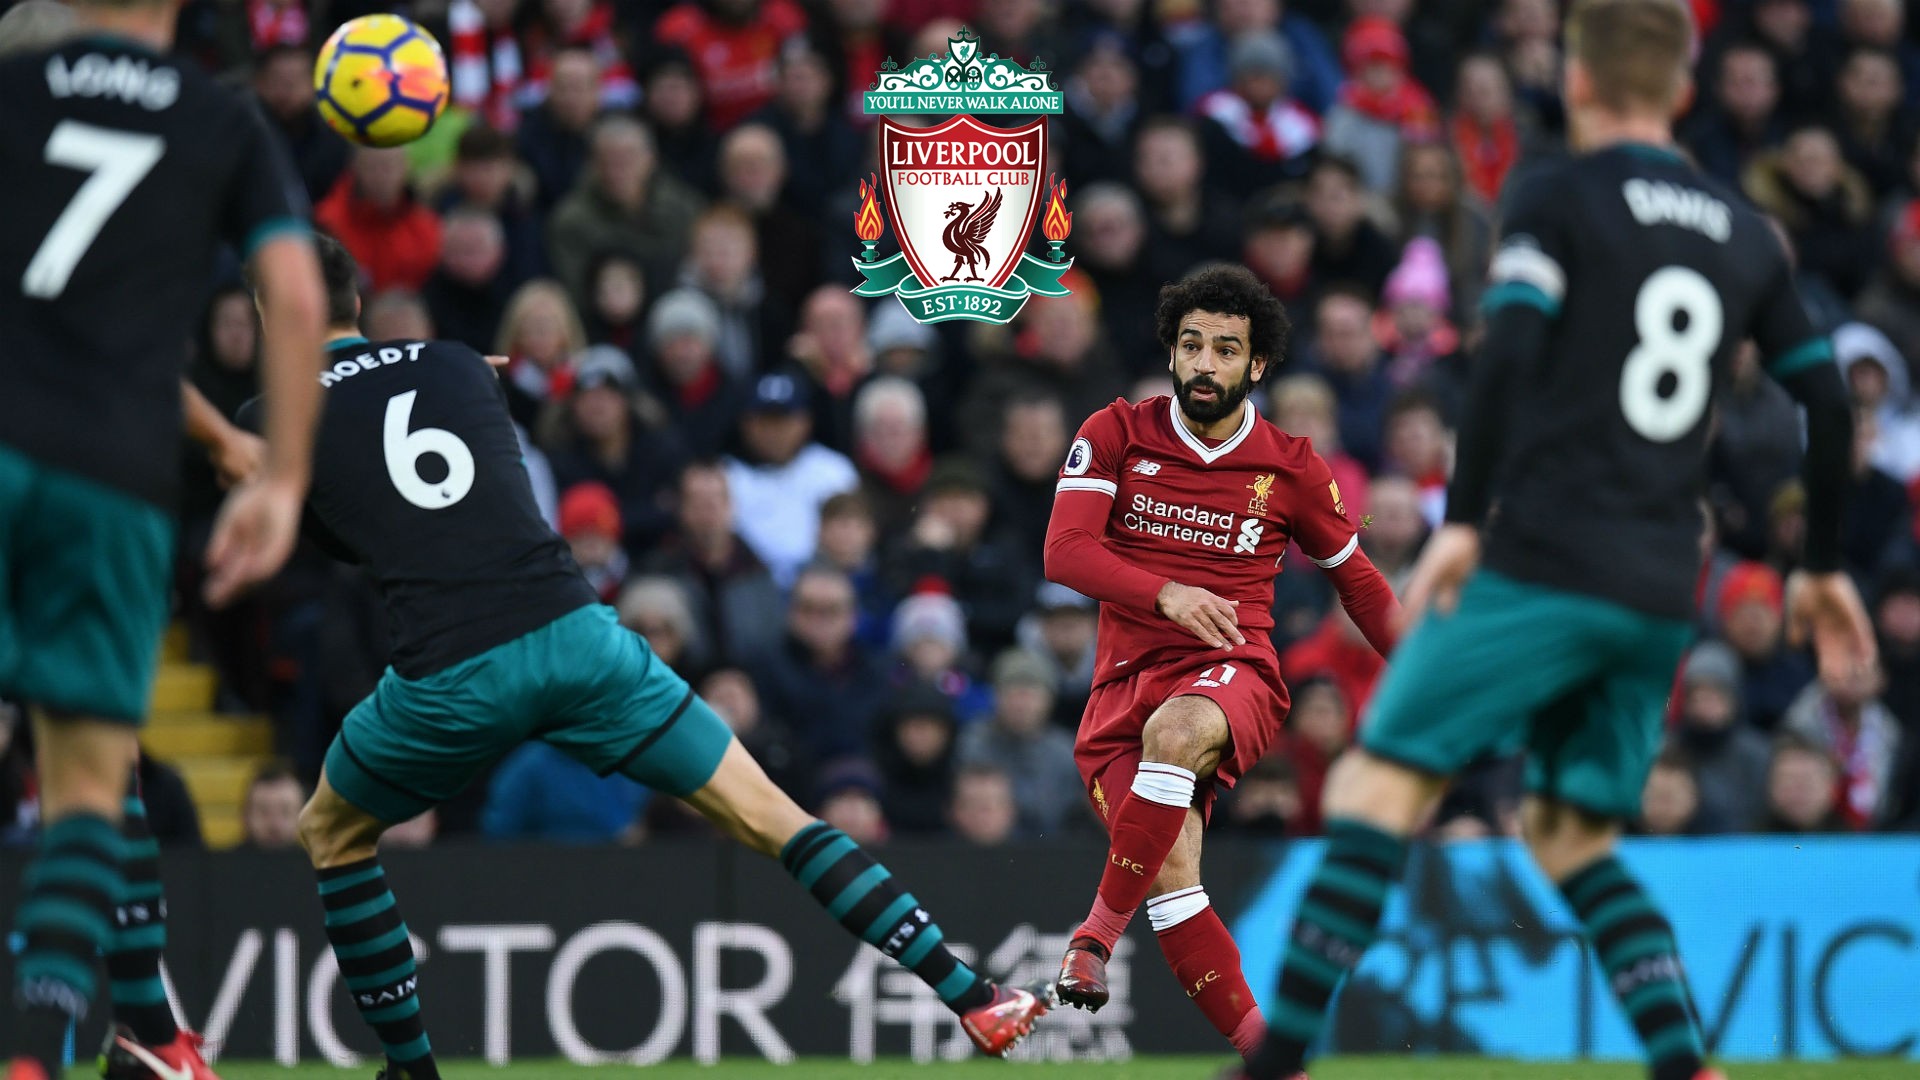 Wallpaper HD Mohamed Salah with image resolution 1920x1080 pixel. You can make this wallpaper for your Desktop Computer Backgrounds, Mac Wallpapers, Android Lock screen or iPhone Screensavers